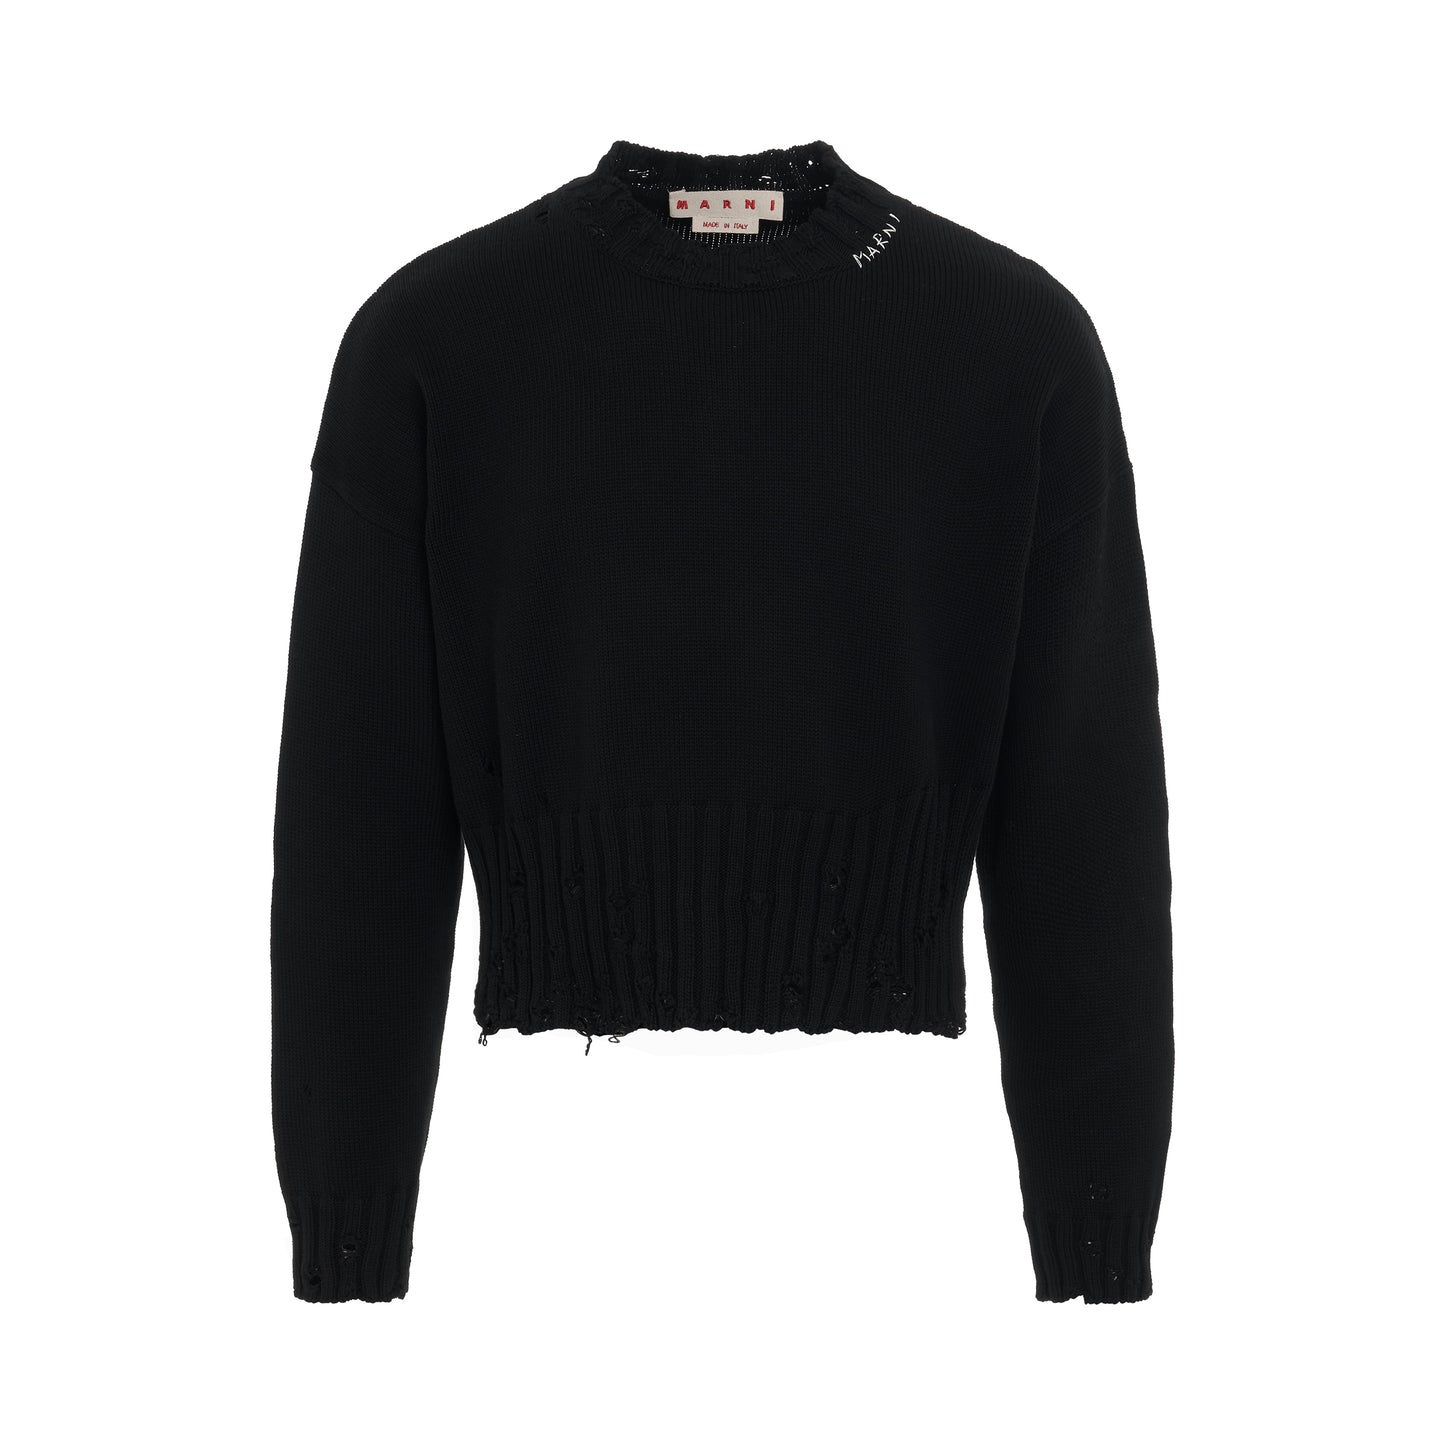 Boxy Destroyed Knit Sweater in Black